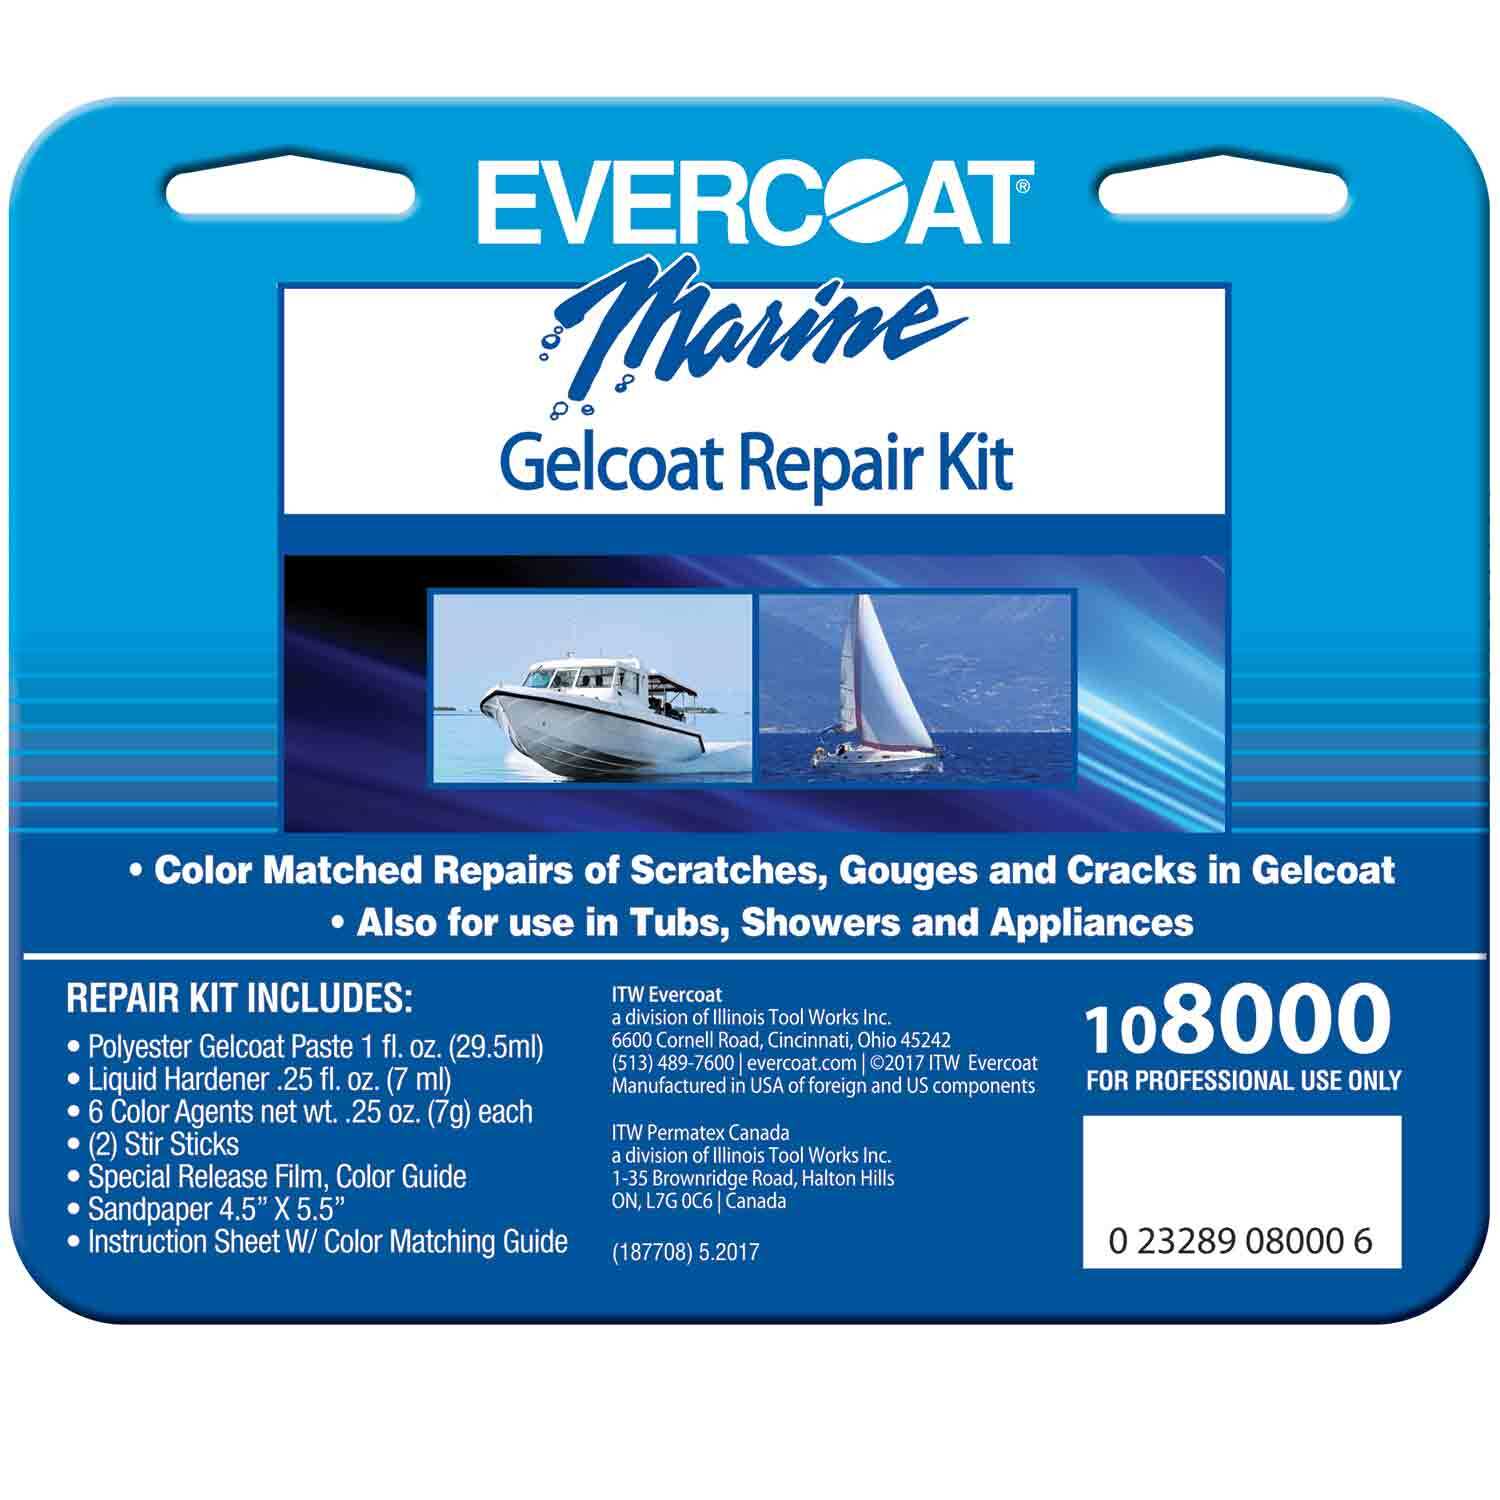 How to repair gel coat - video guide - Yachting Monthly